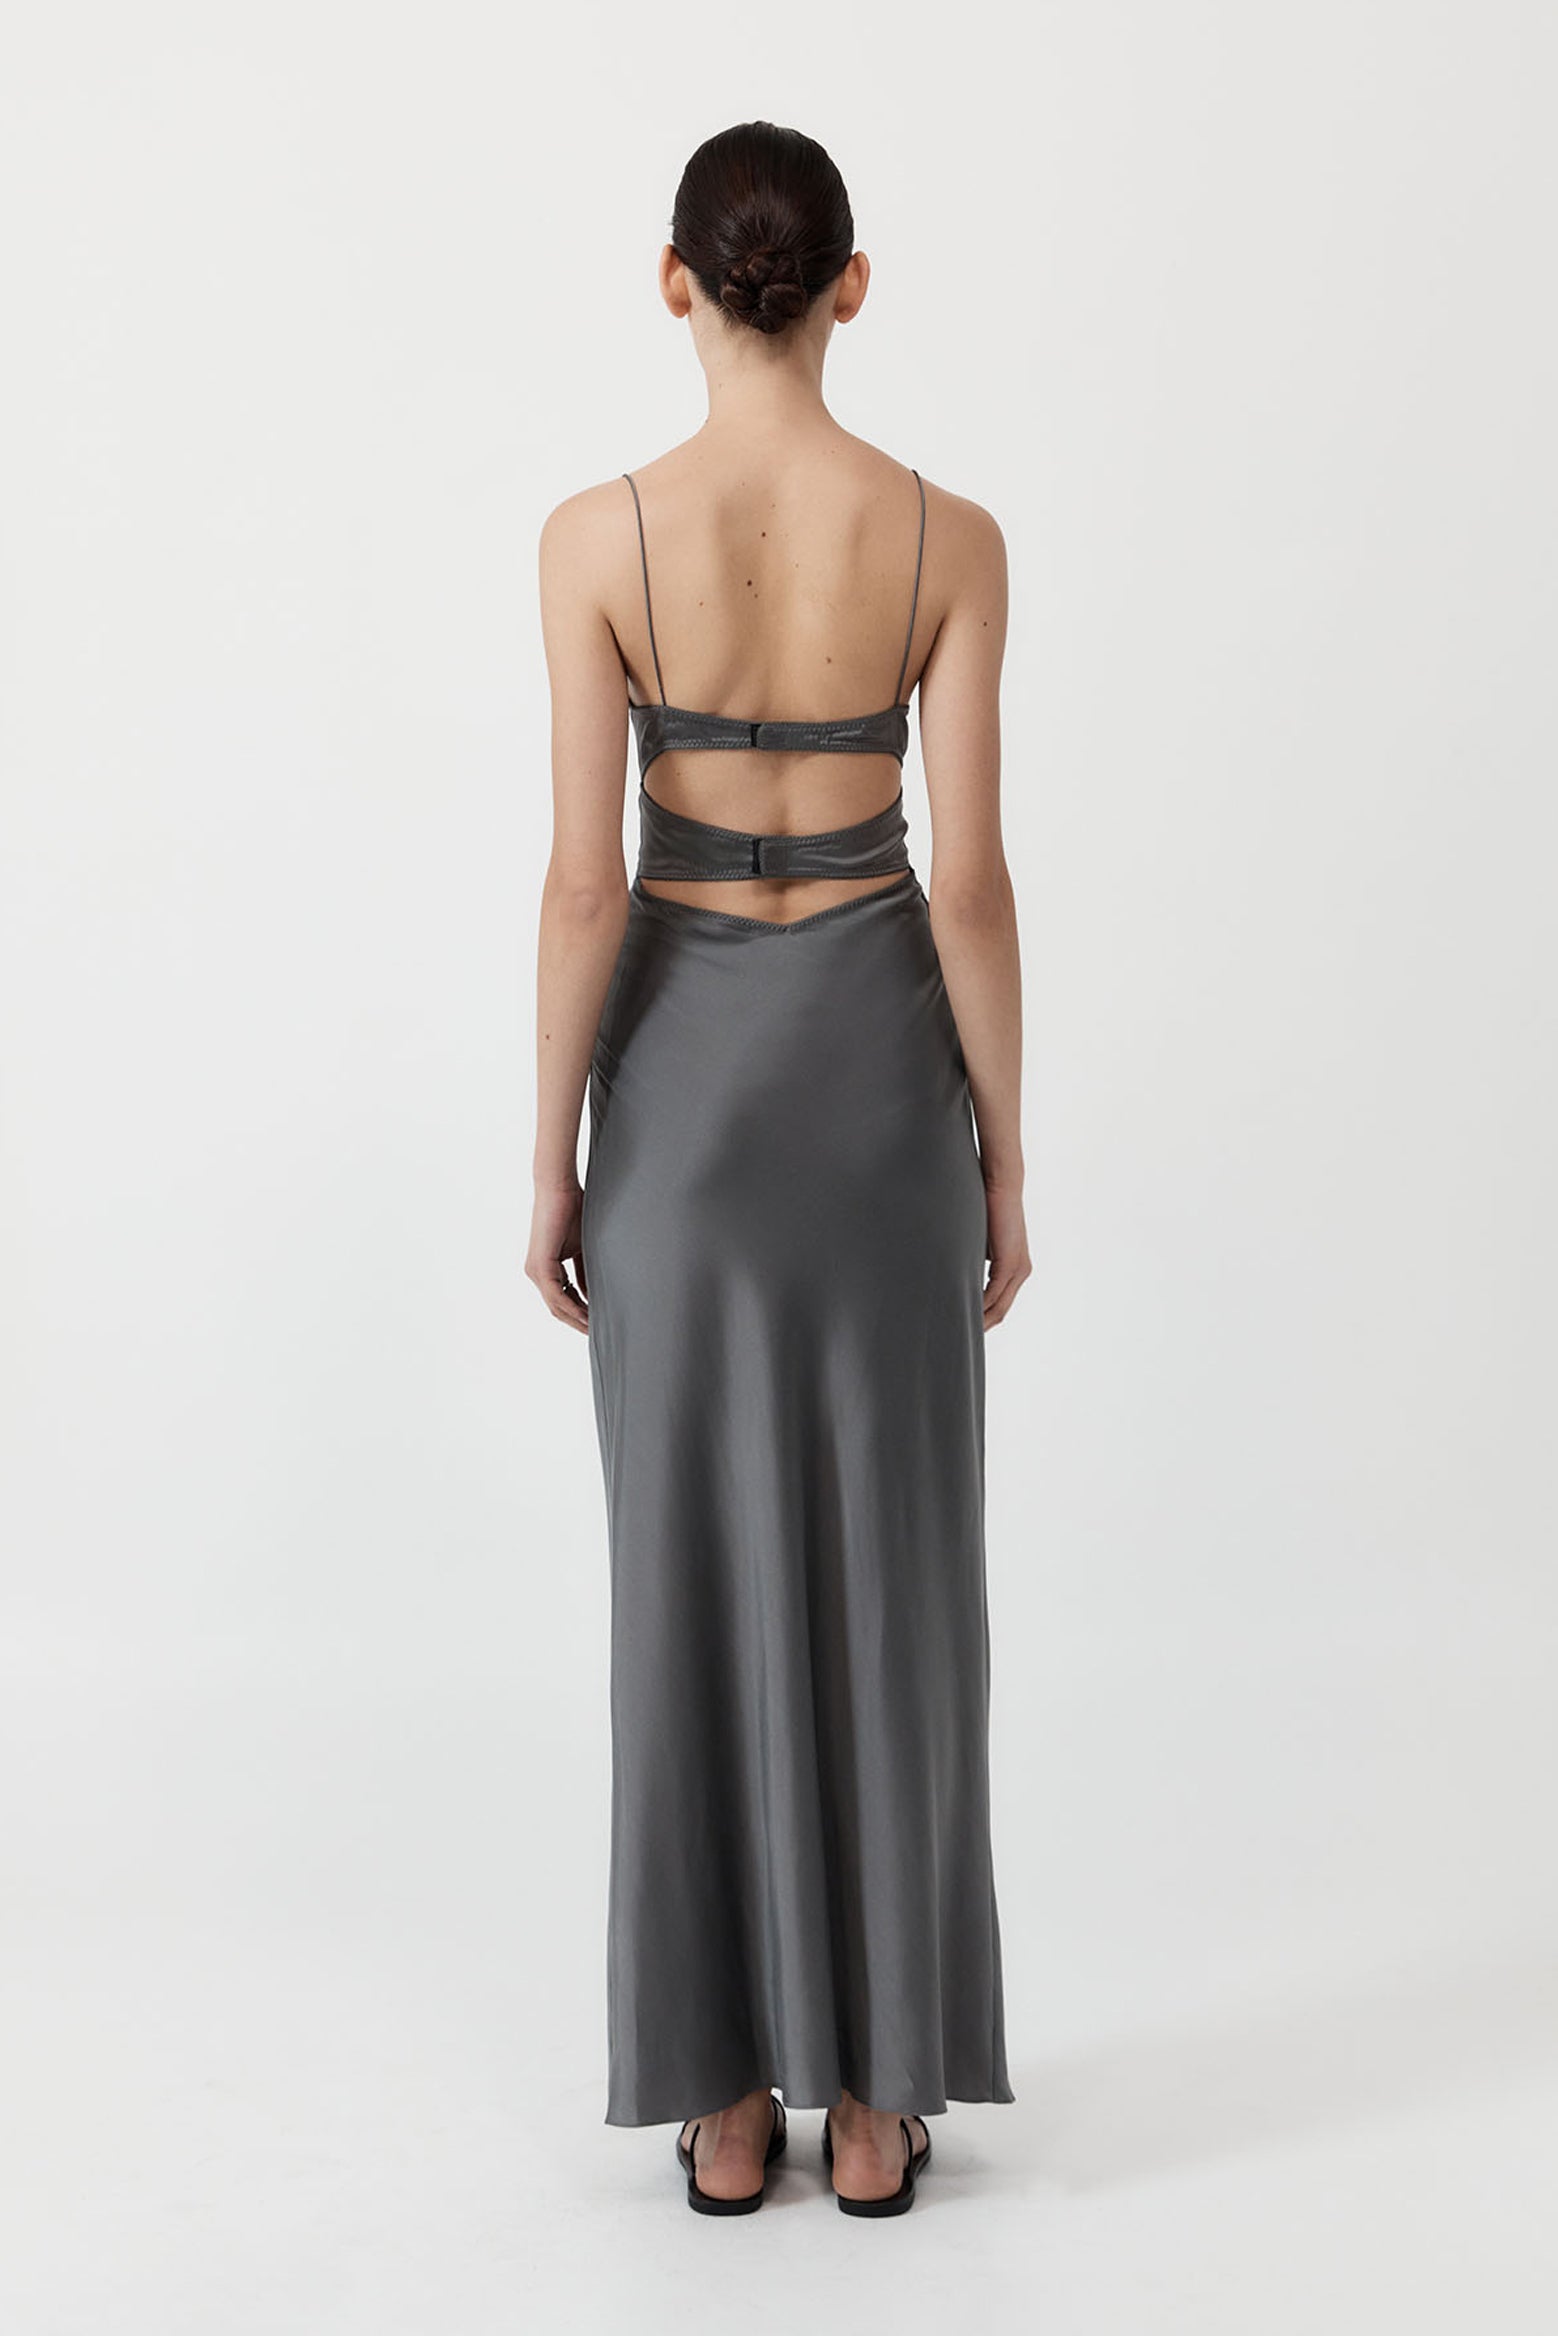 St Agni Soft Silk Bra Bias Slip Dress in Pewter Grey available at The New Trend Australia.